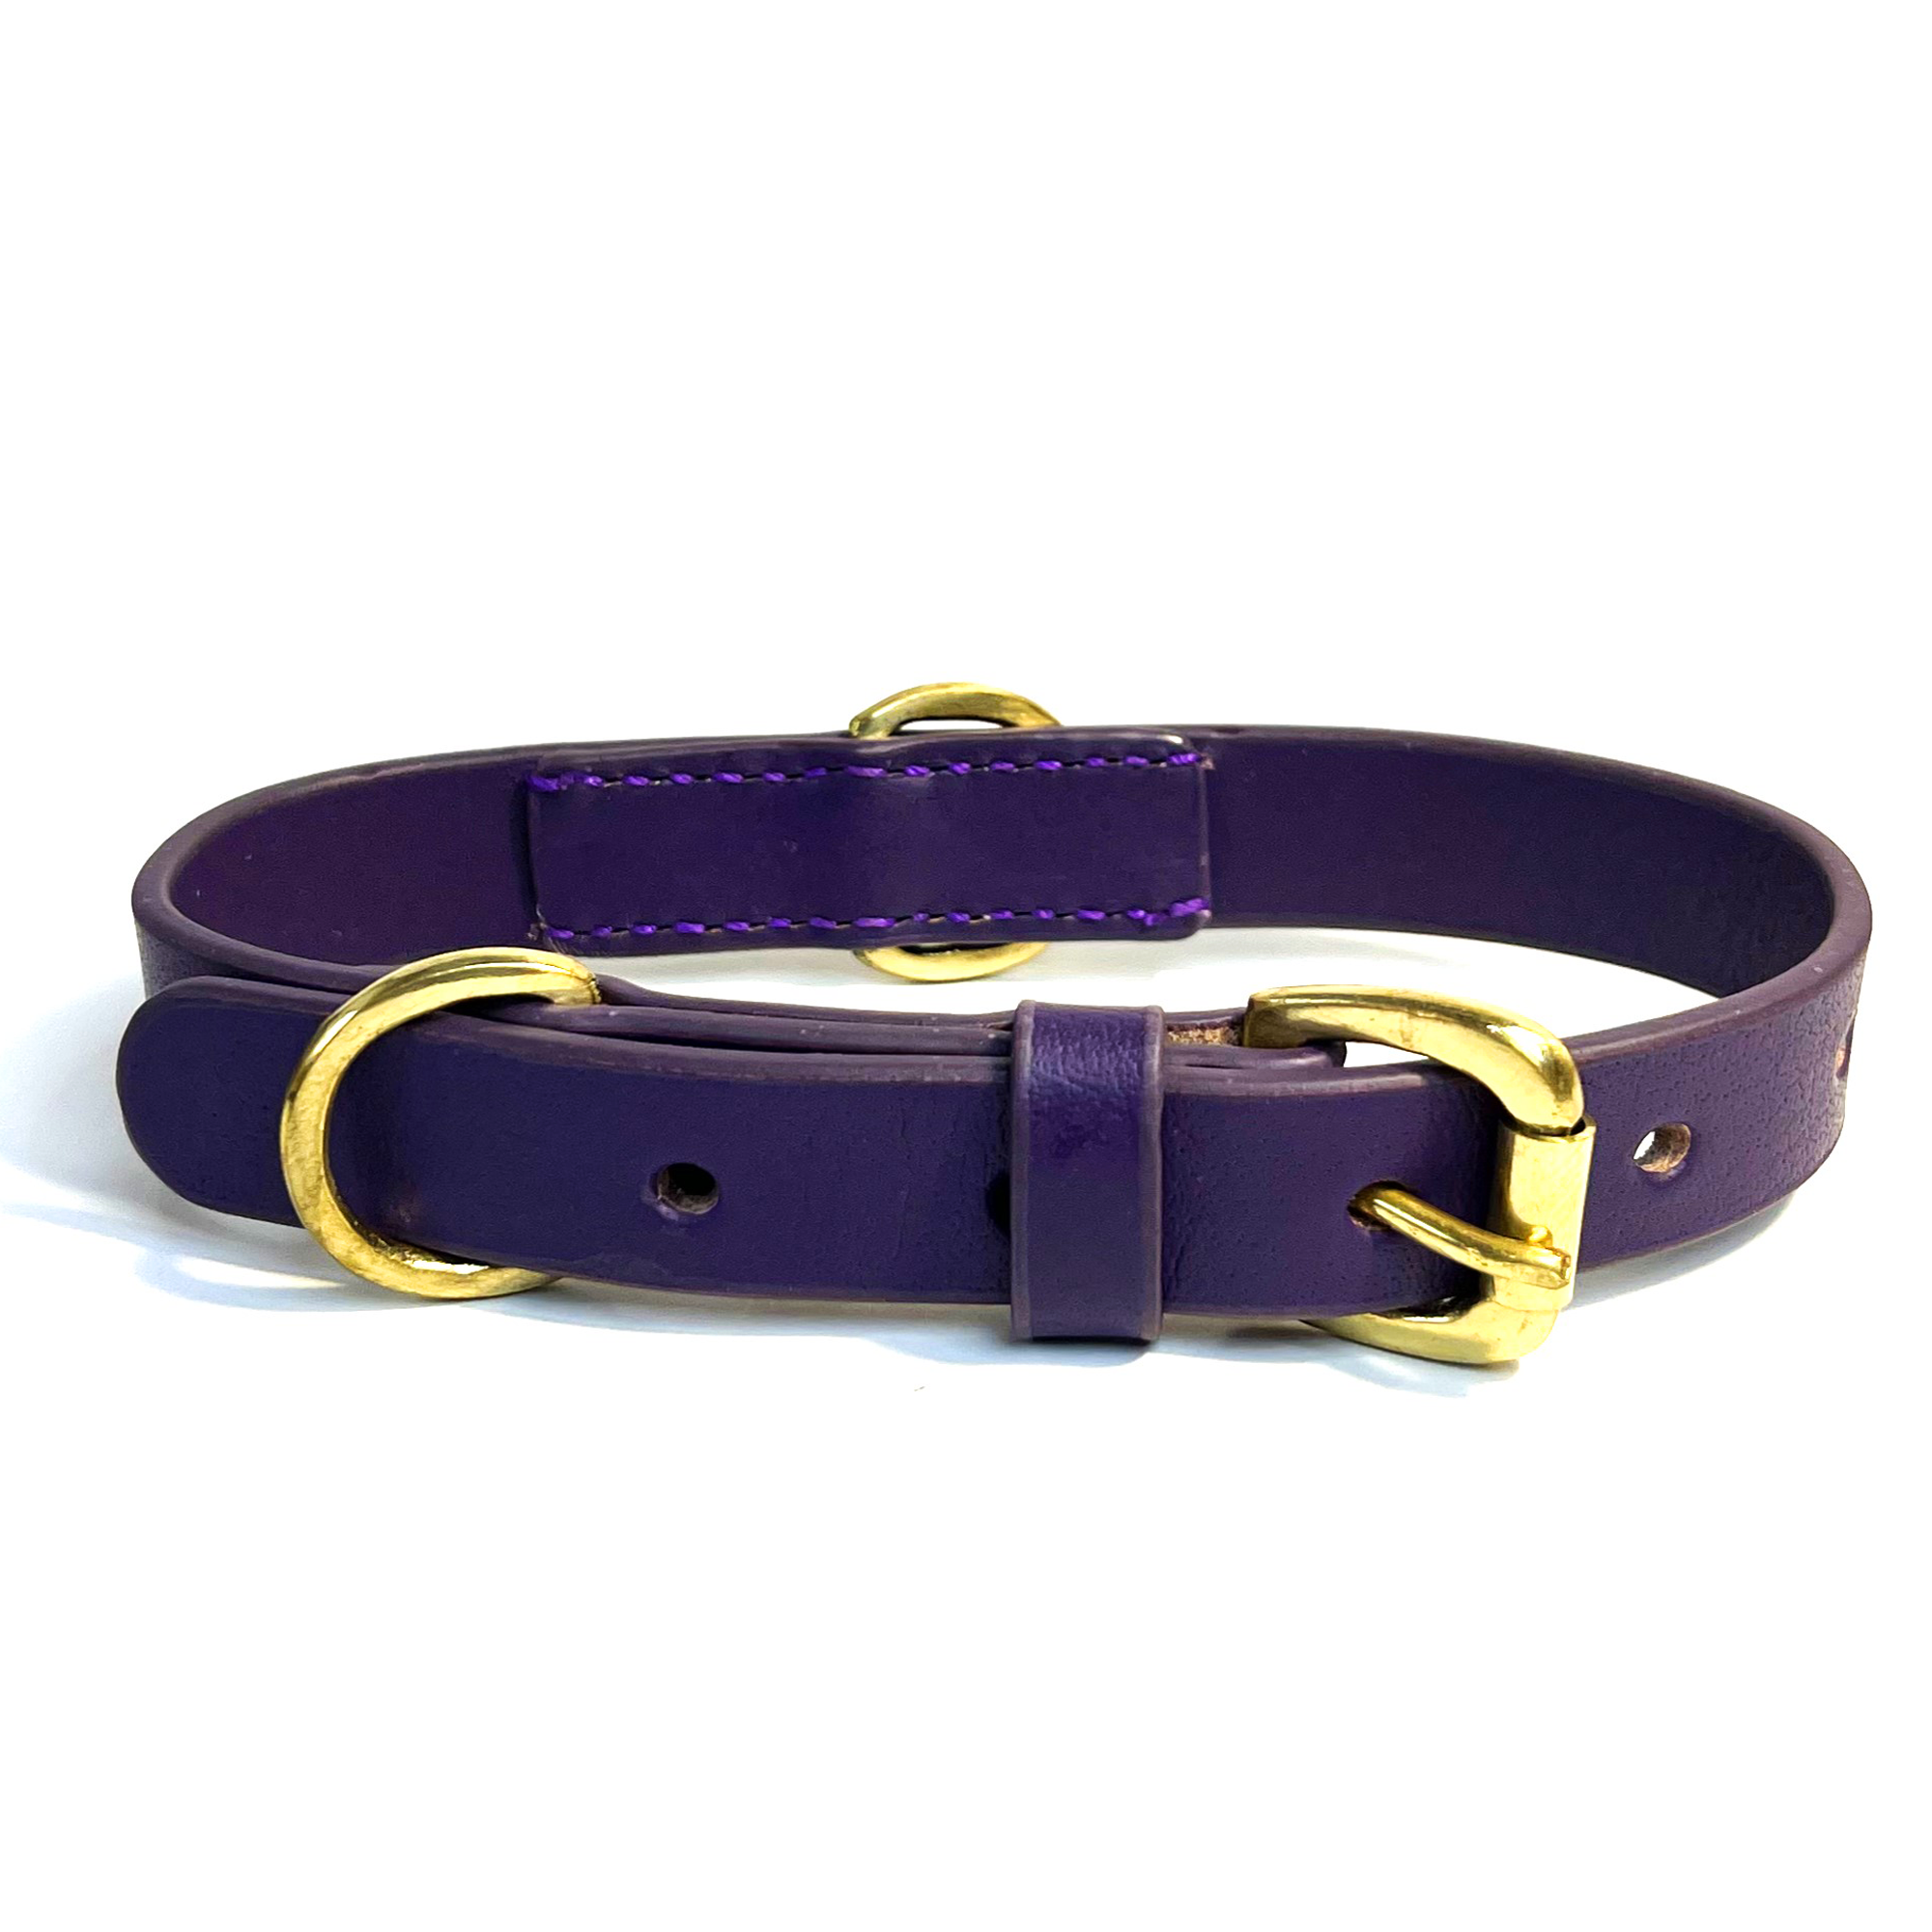 A hand-crafted Georgie Paws Bald Collar Purple with gold-tone hardware, featuring a buckle and d-ring, isolated on a white background.